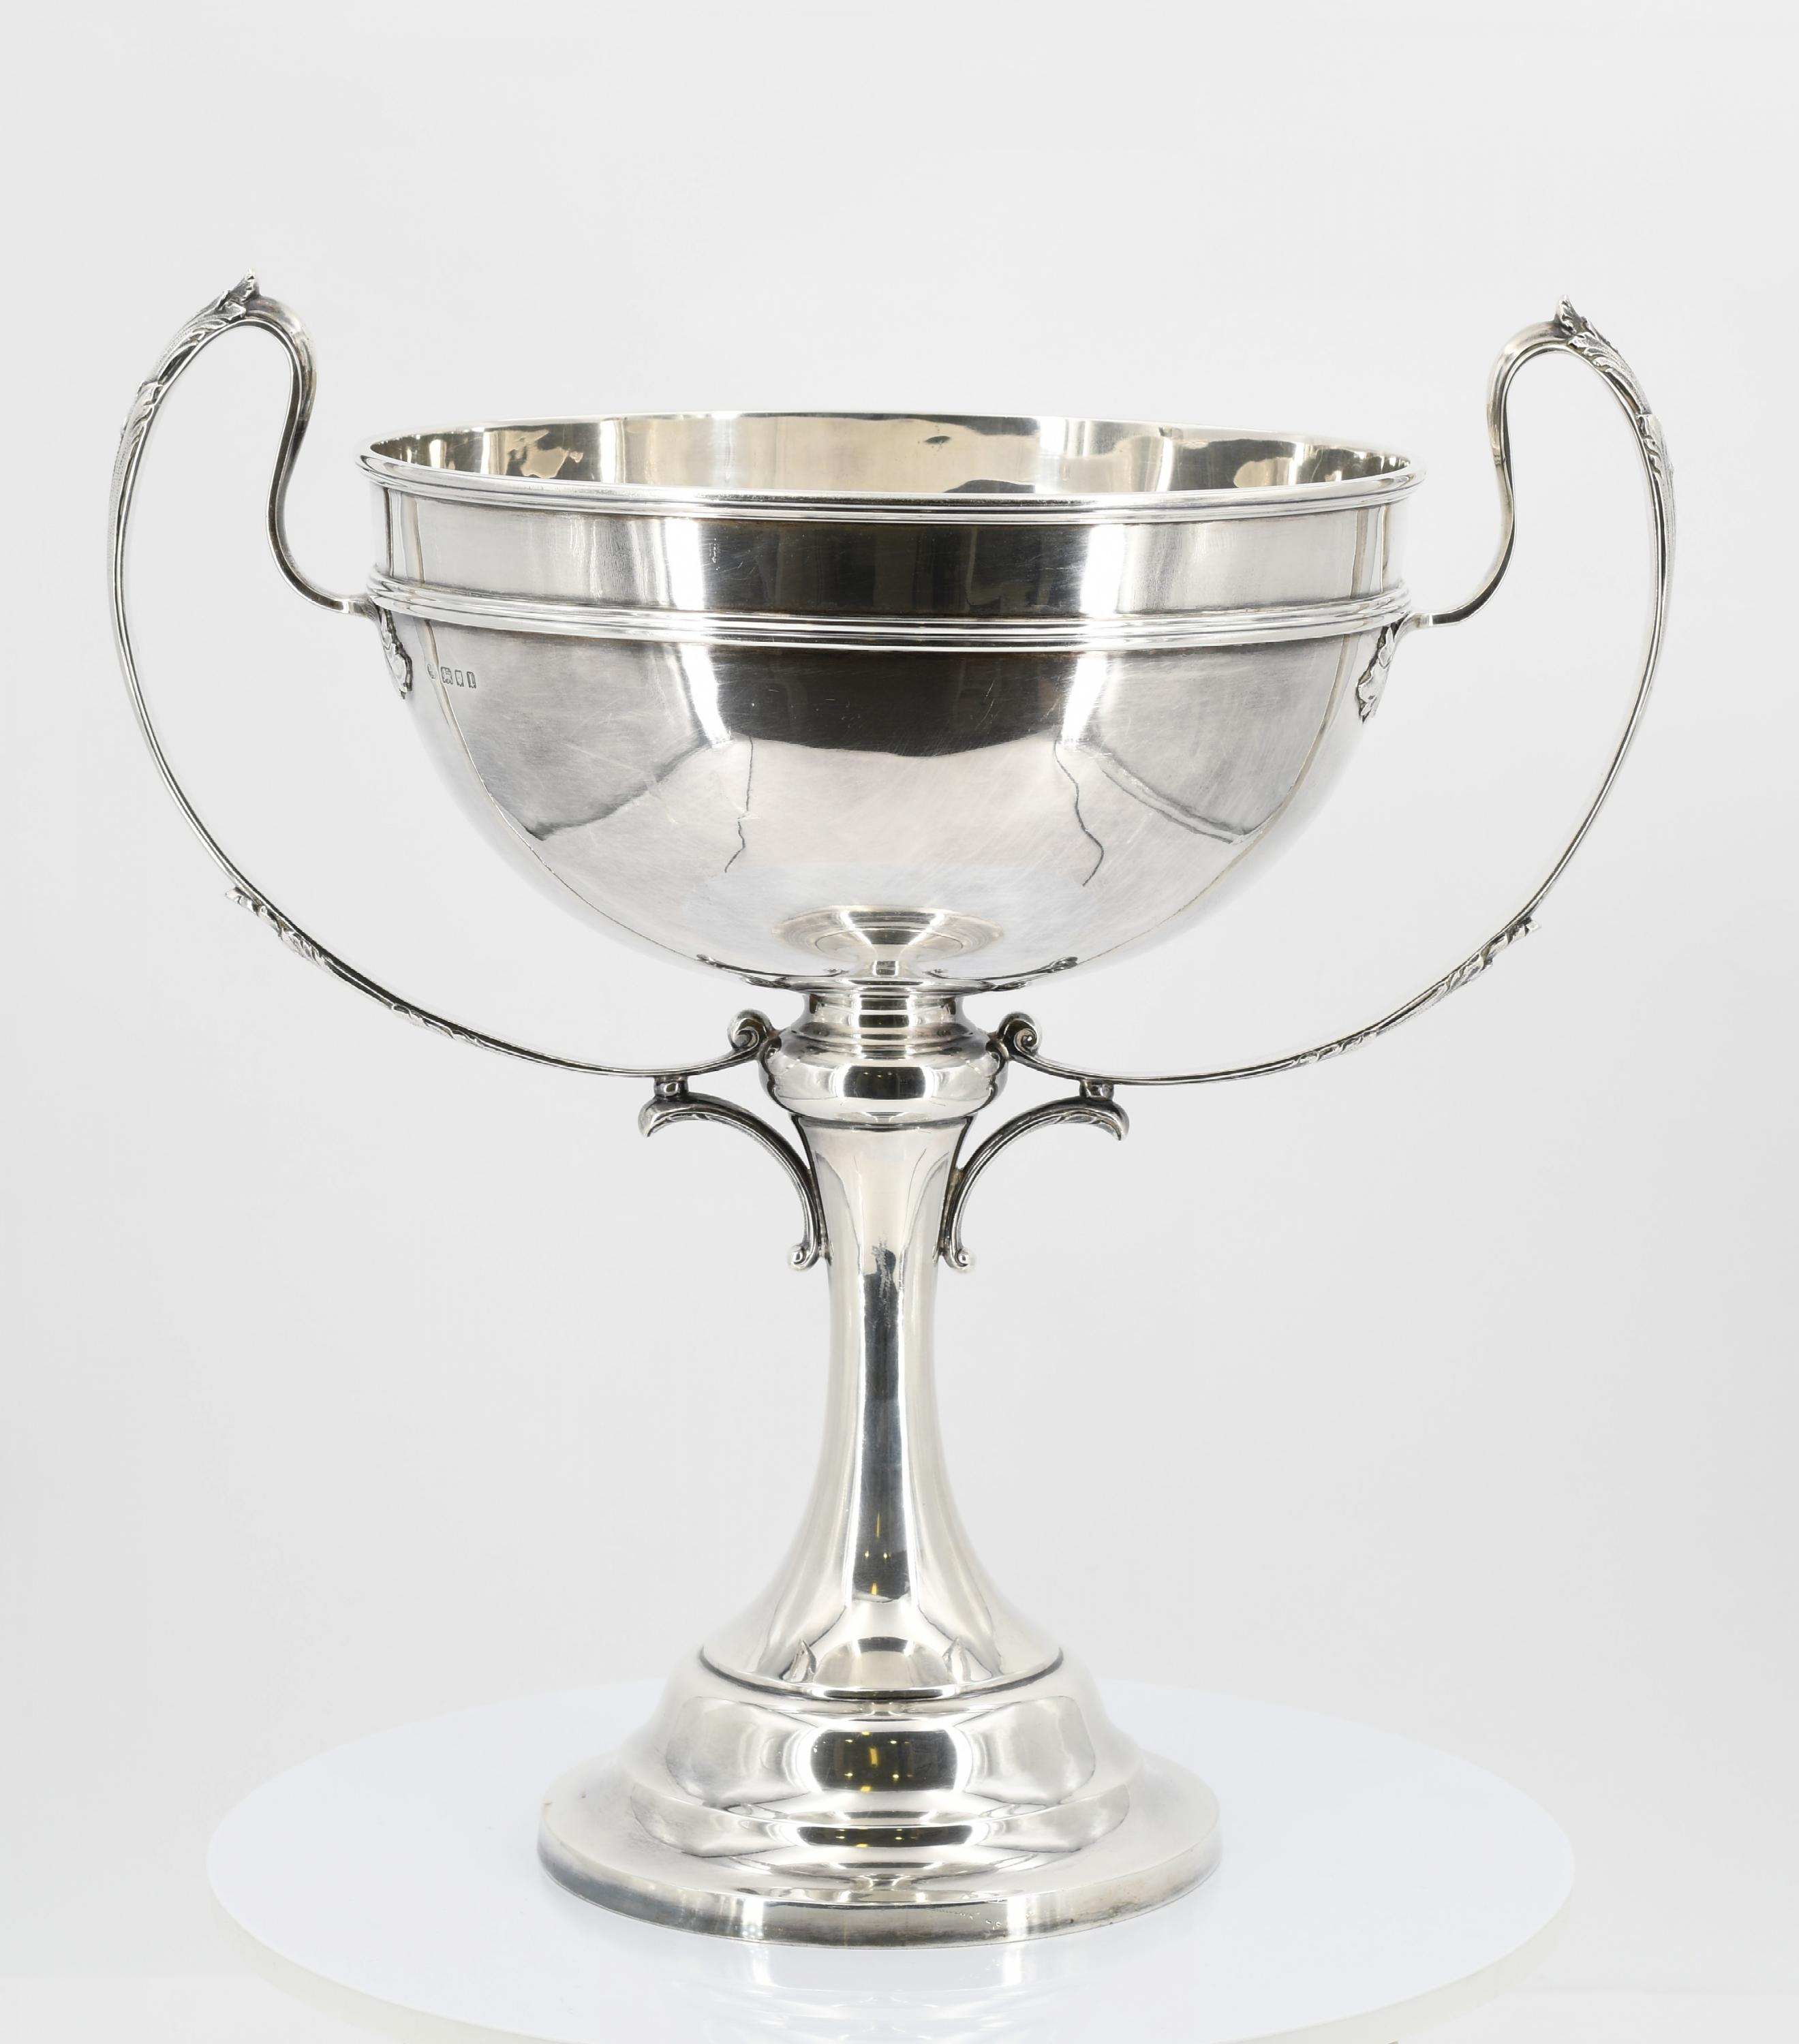 Large George V bowl with handles - Image 4 of 7